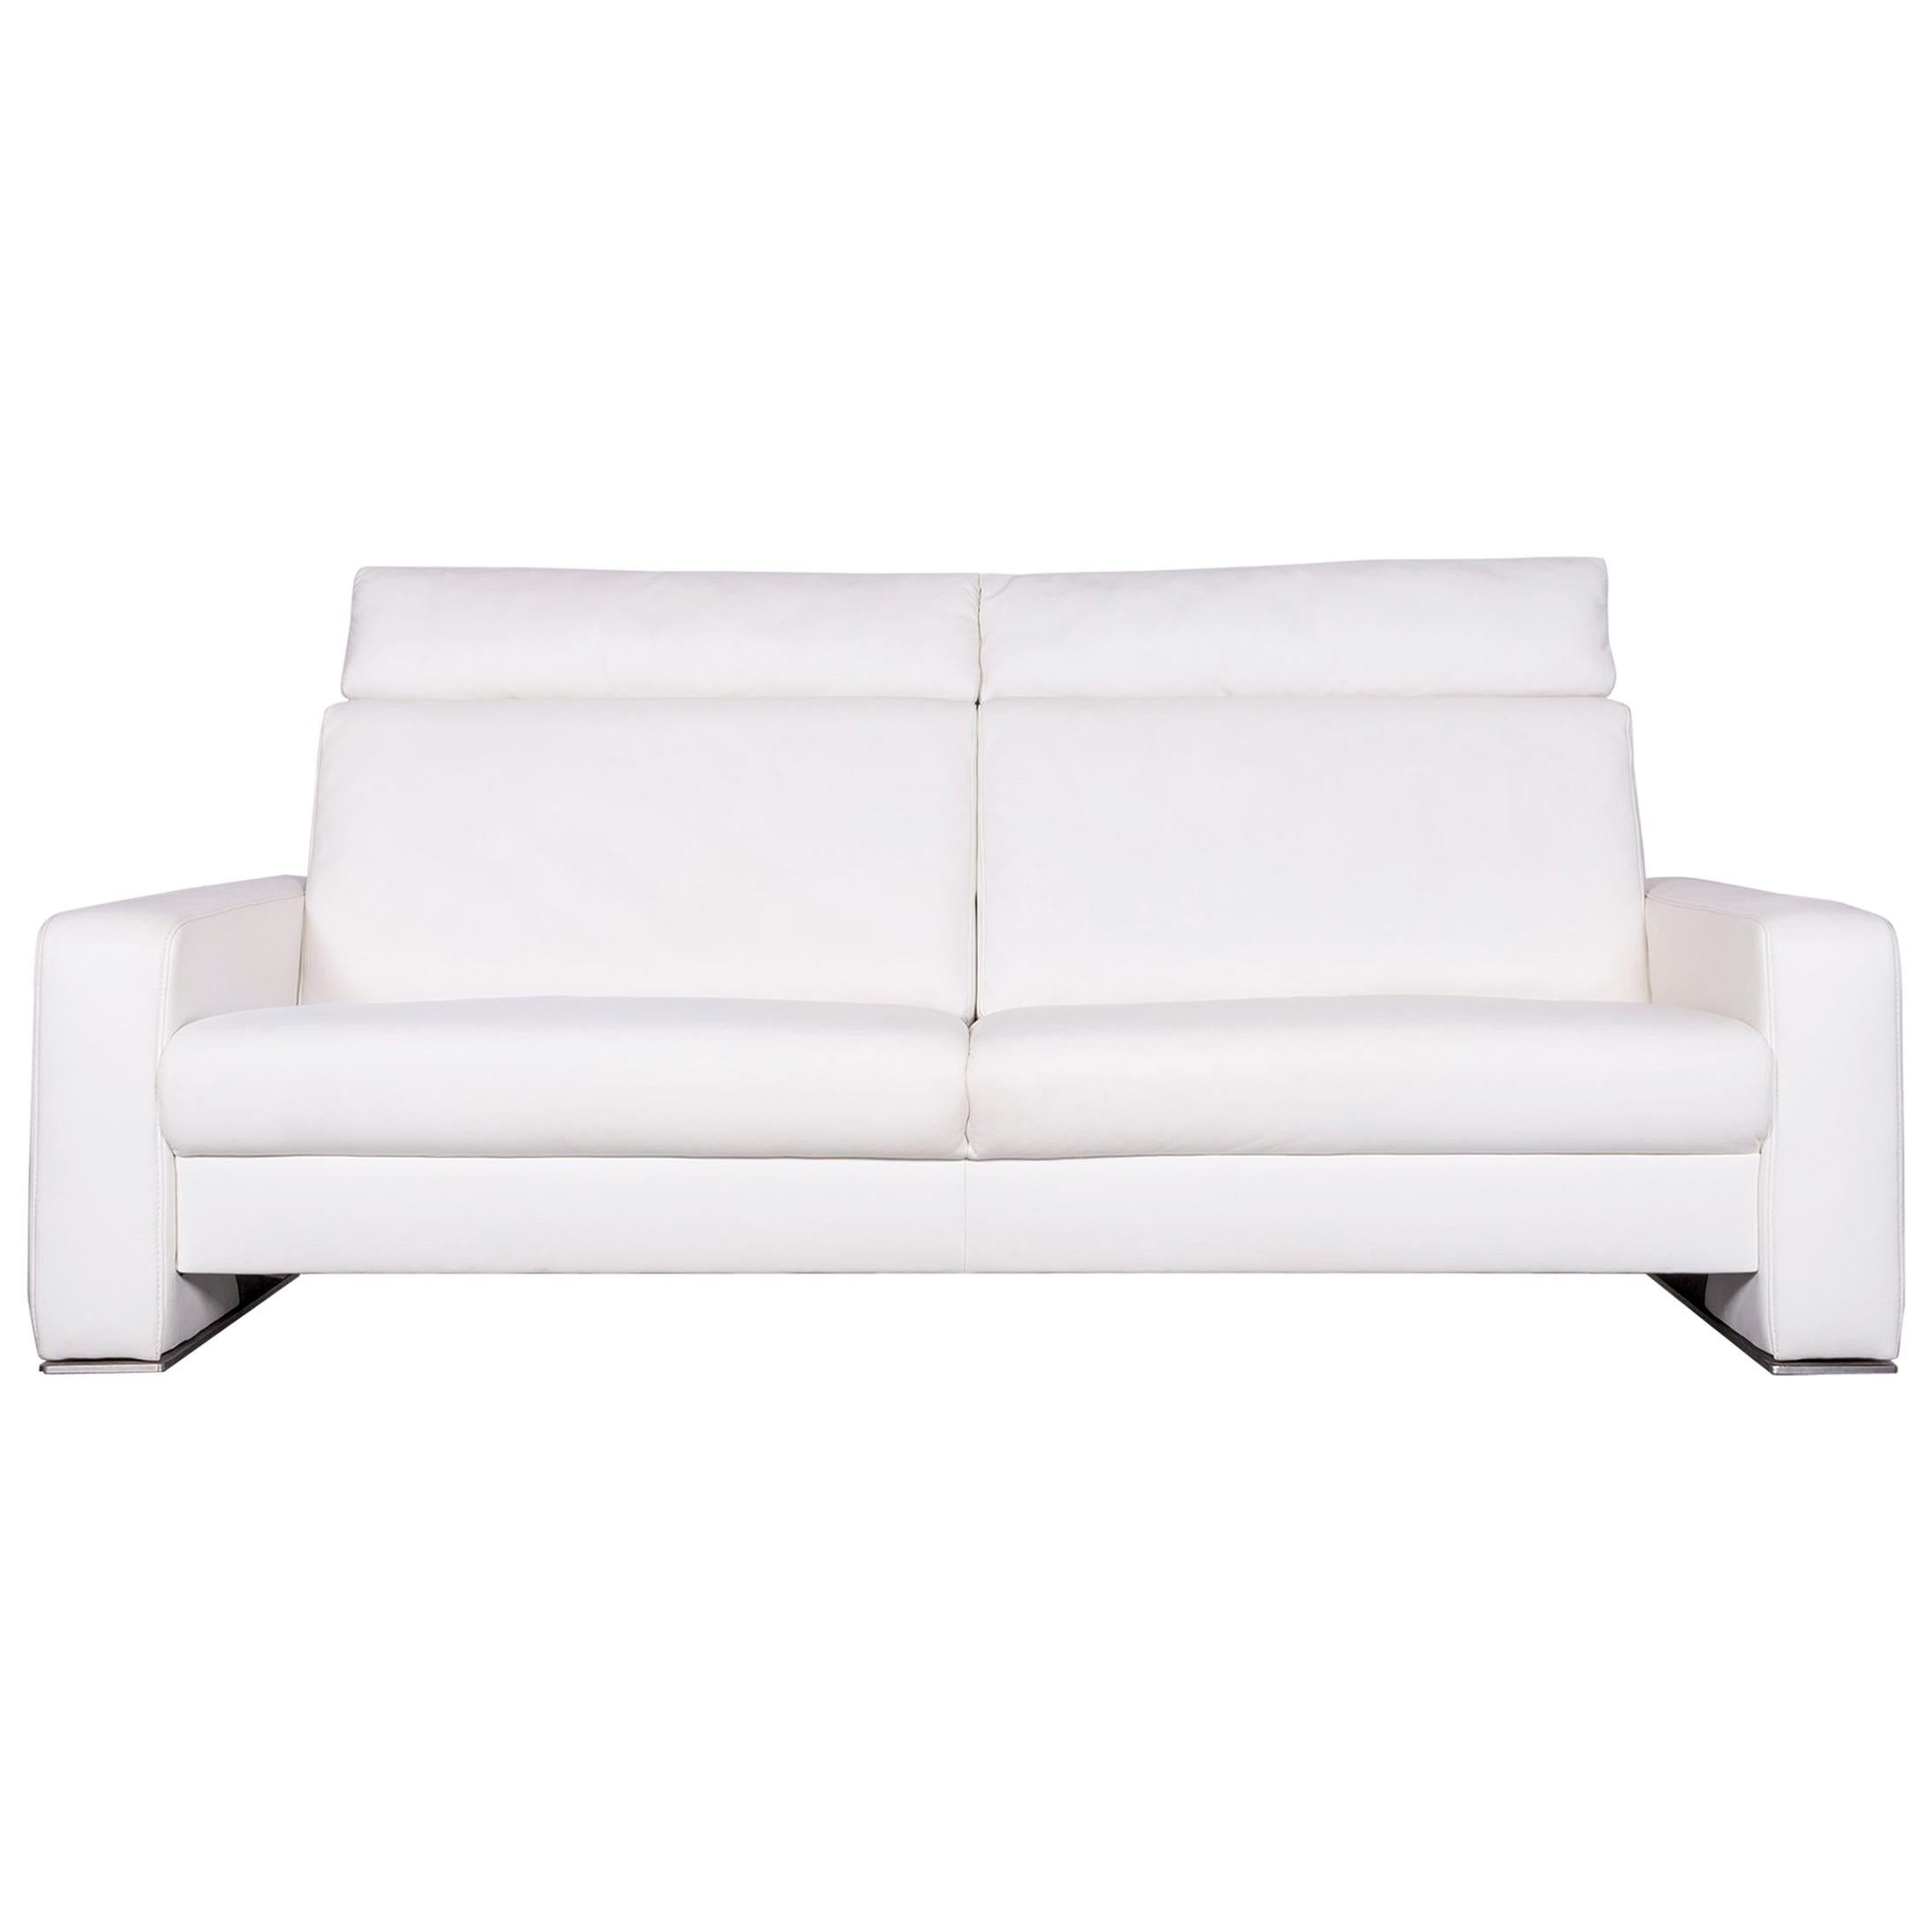 Joop! Designer Leather Sofa White Three-Seat Couch For Sale